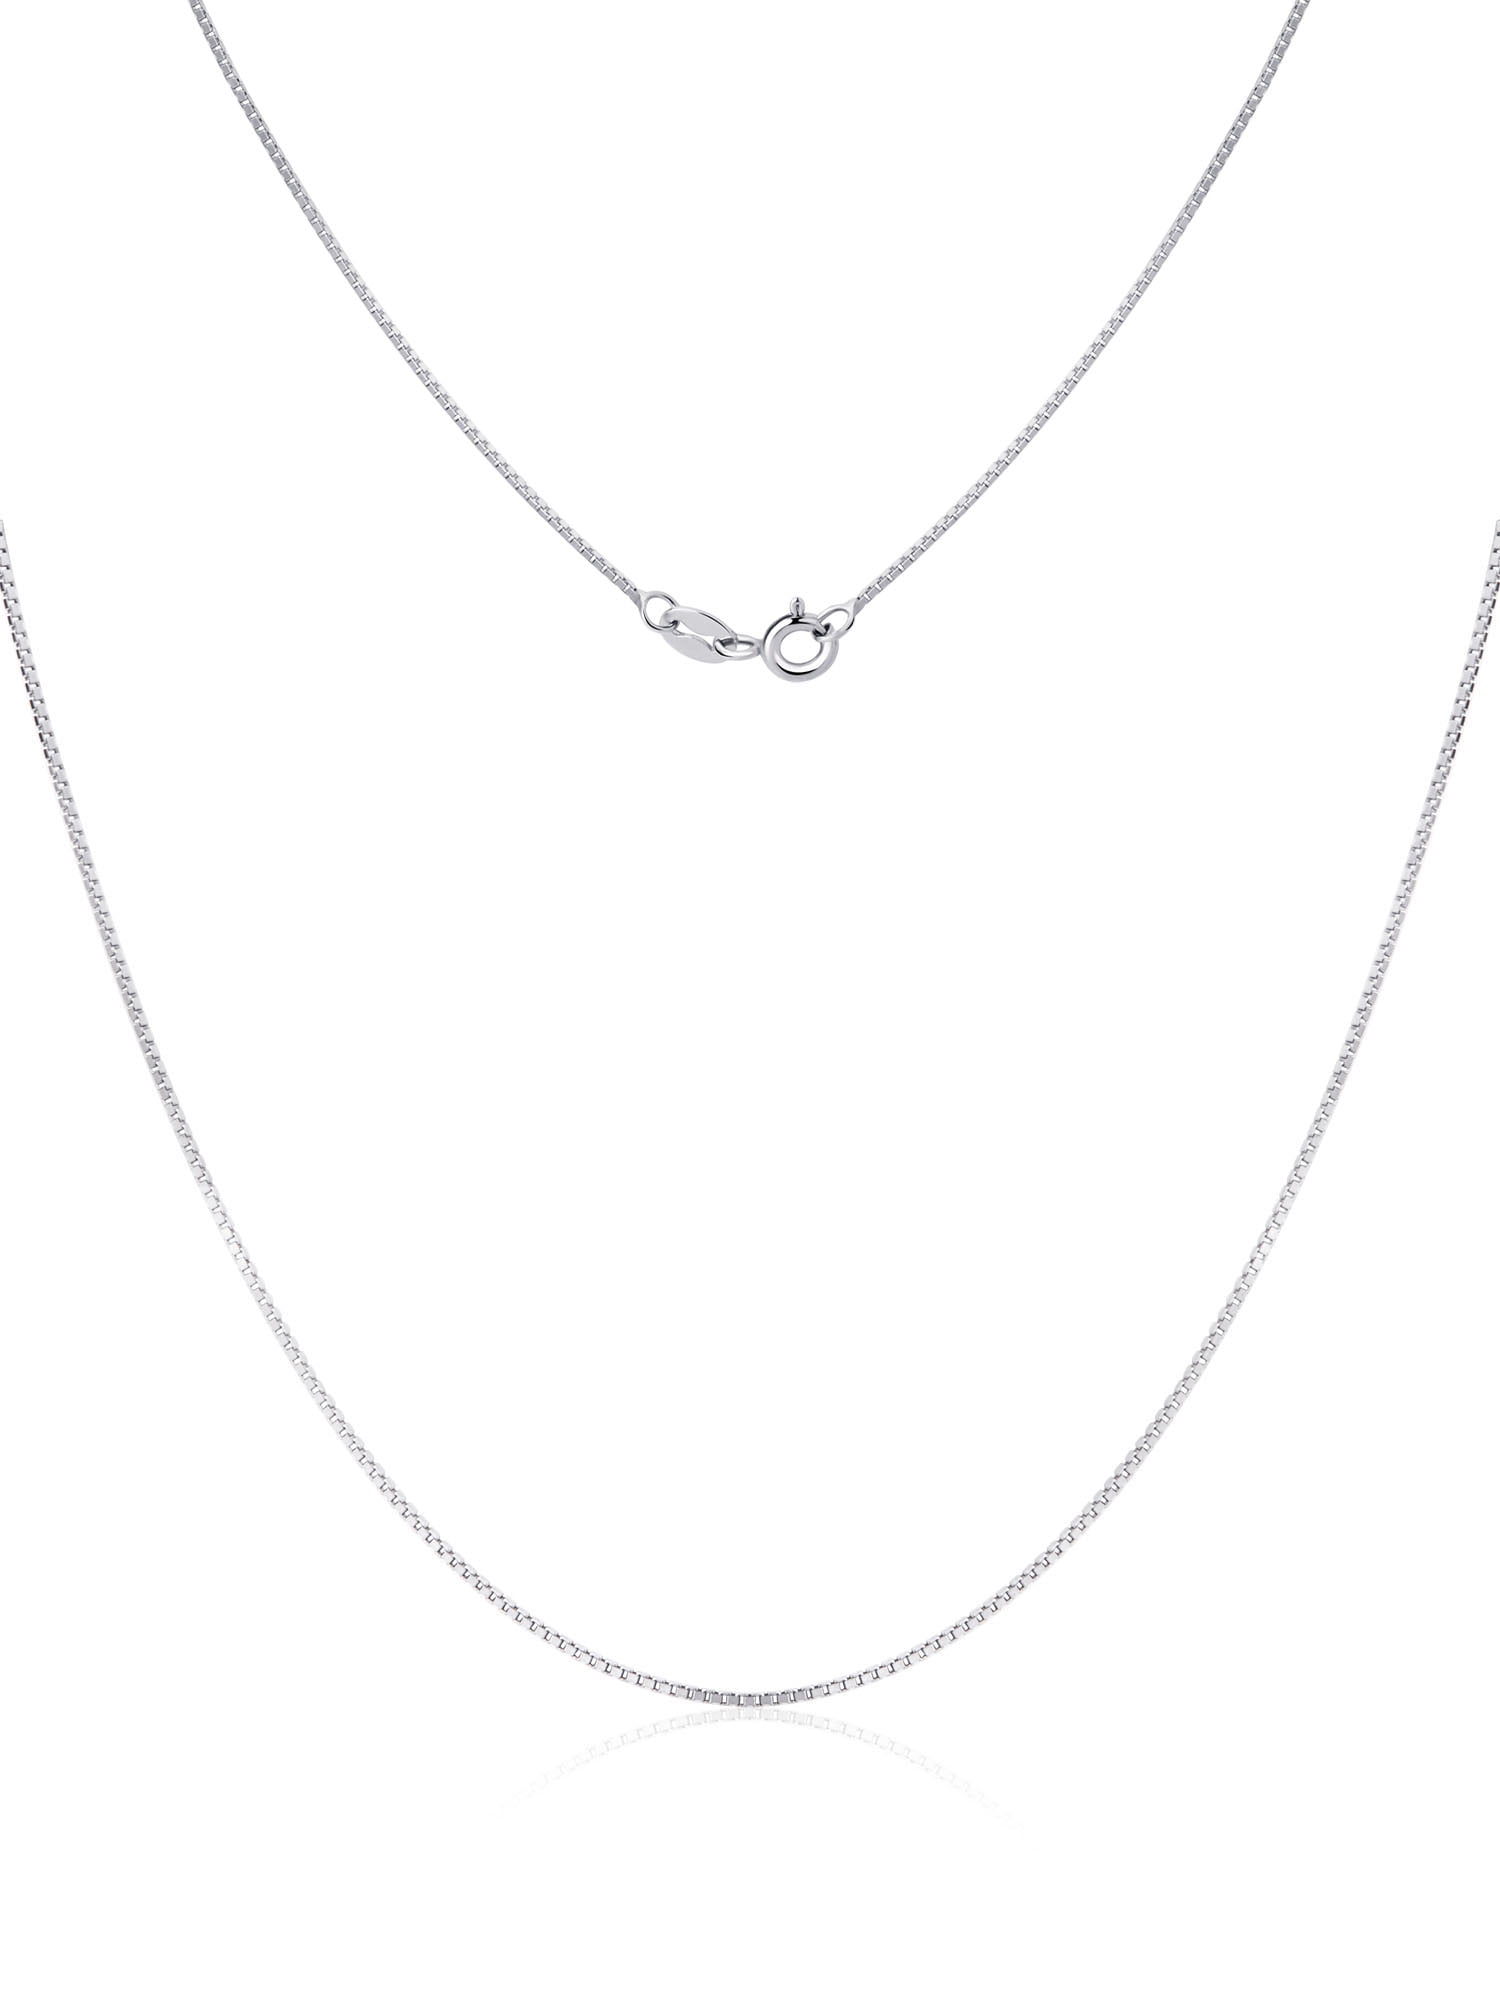 Details about   New 925 Sterling Silver 24 Inch Box necklace chain 0.9mm Link & gift Pouch 